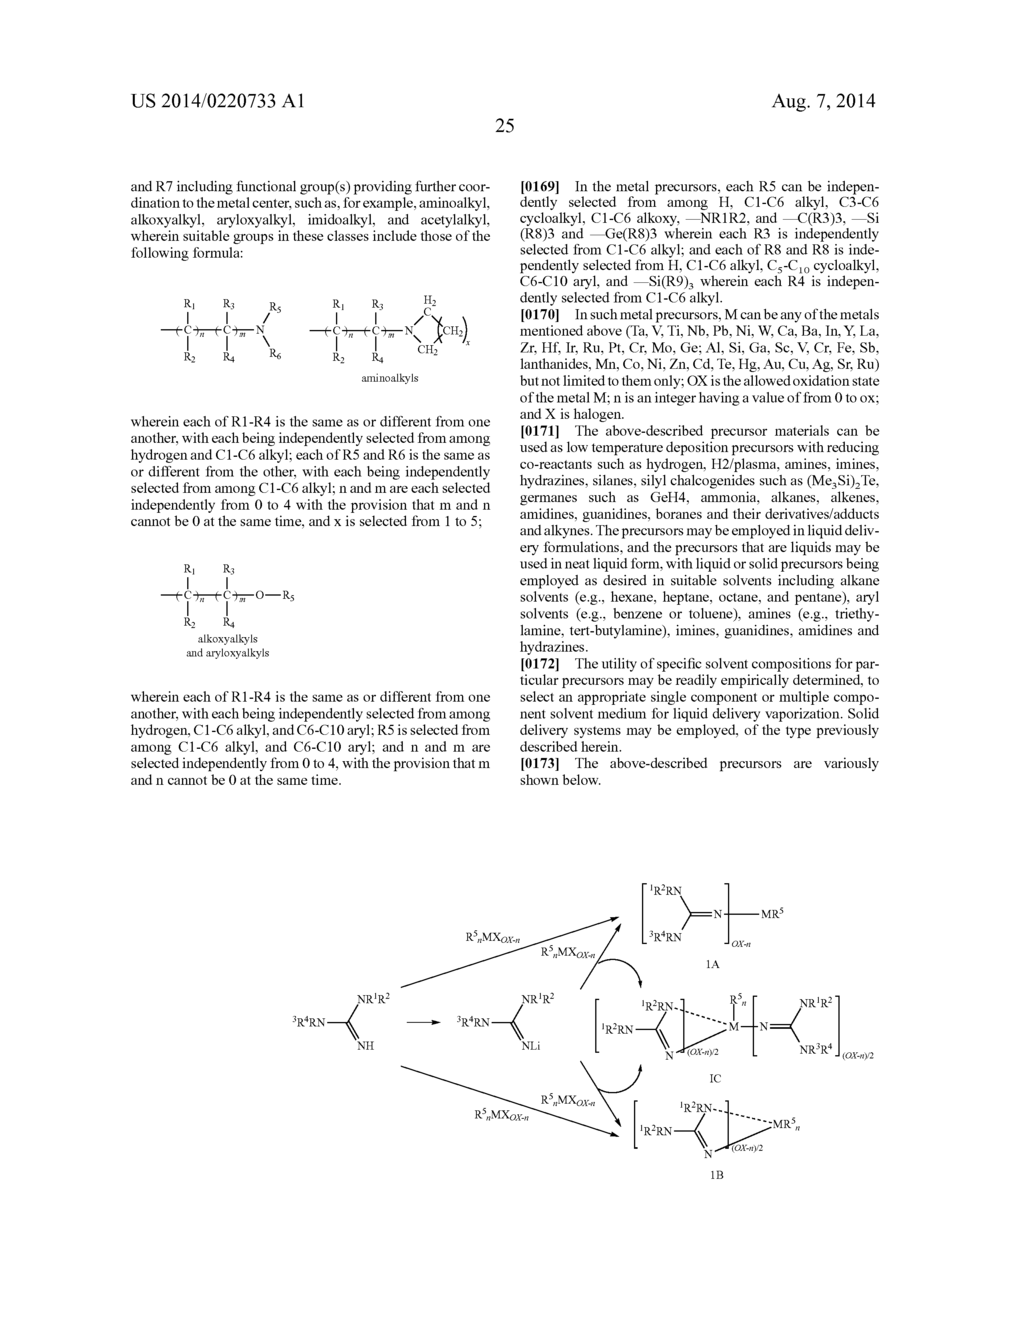 ANTIMONY AND GERMANIUM COMPLEXES USEFUL FOR CVD/ALD OF METAL THIN FILMS - diagram, schematic, and image 31